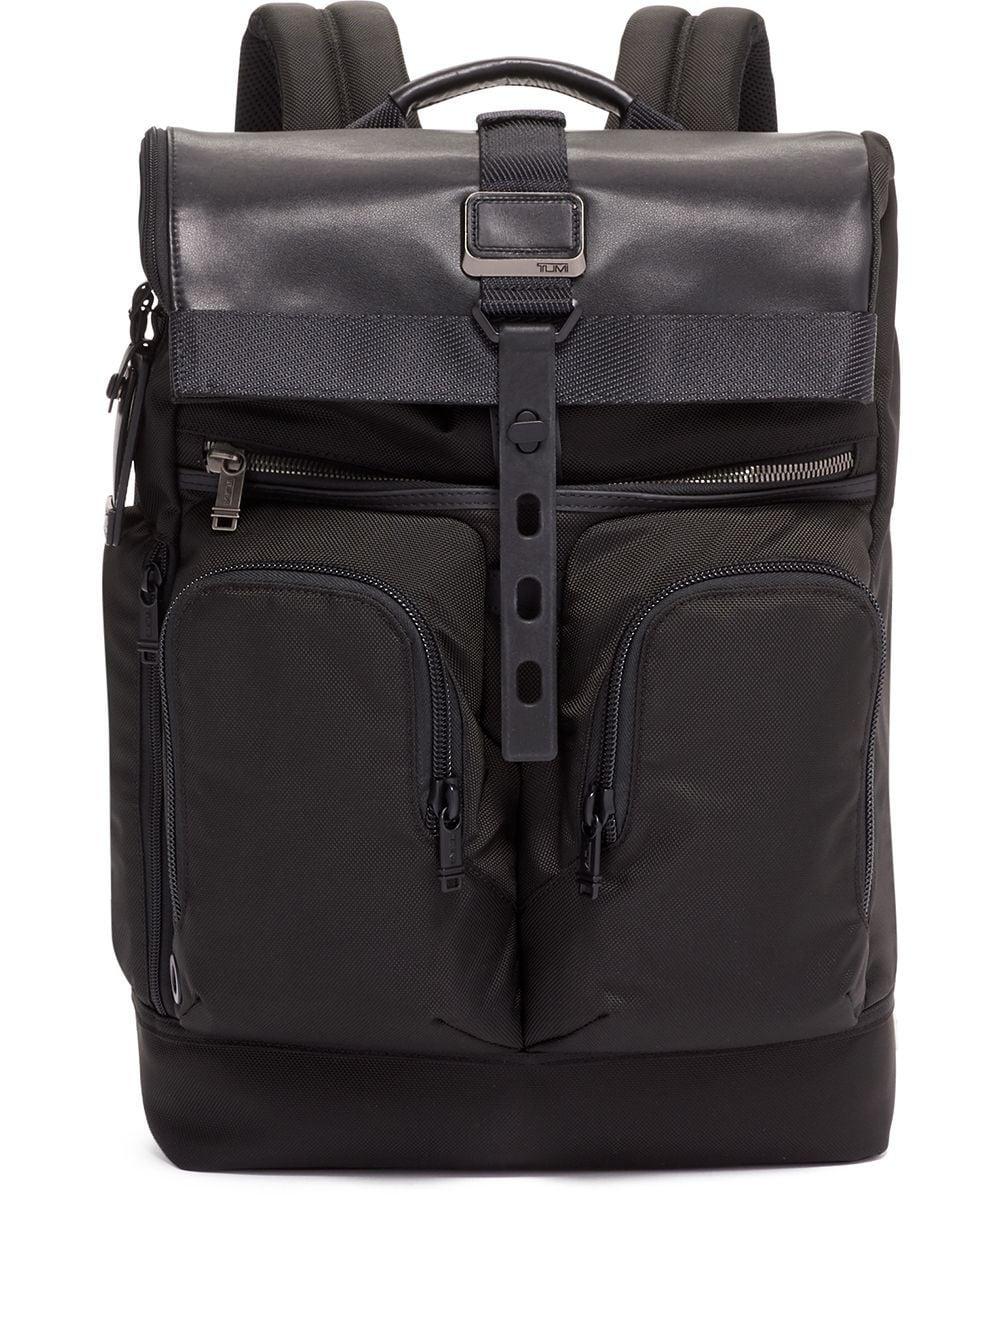 Tumi London Roll-top Backpack in Black for Men - Lyst